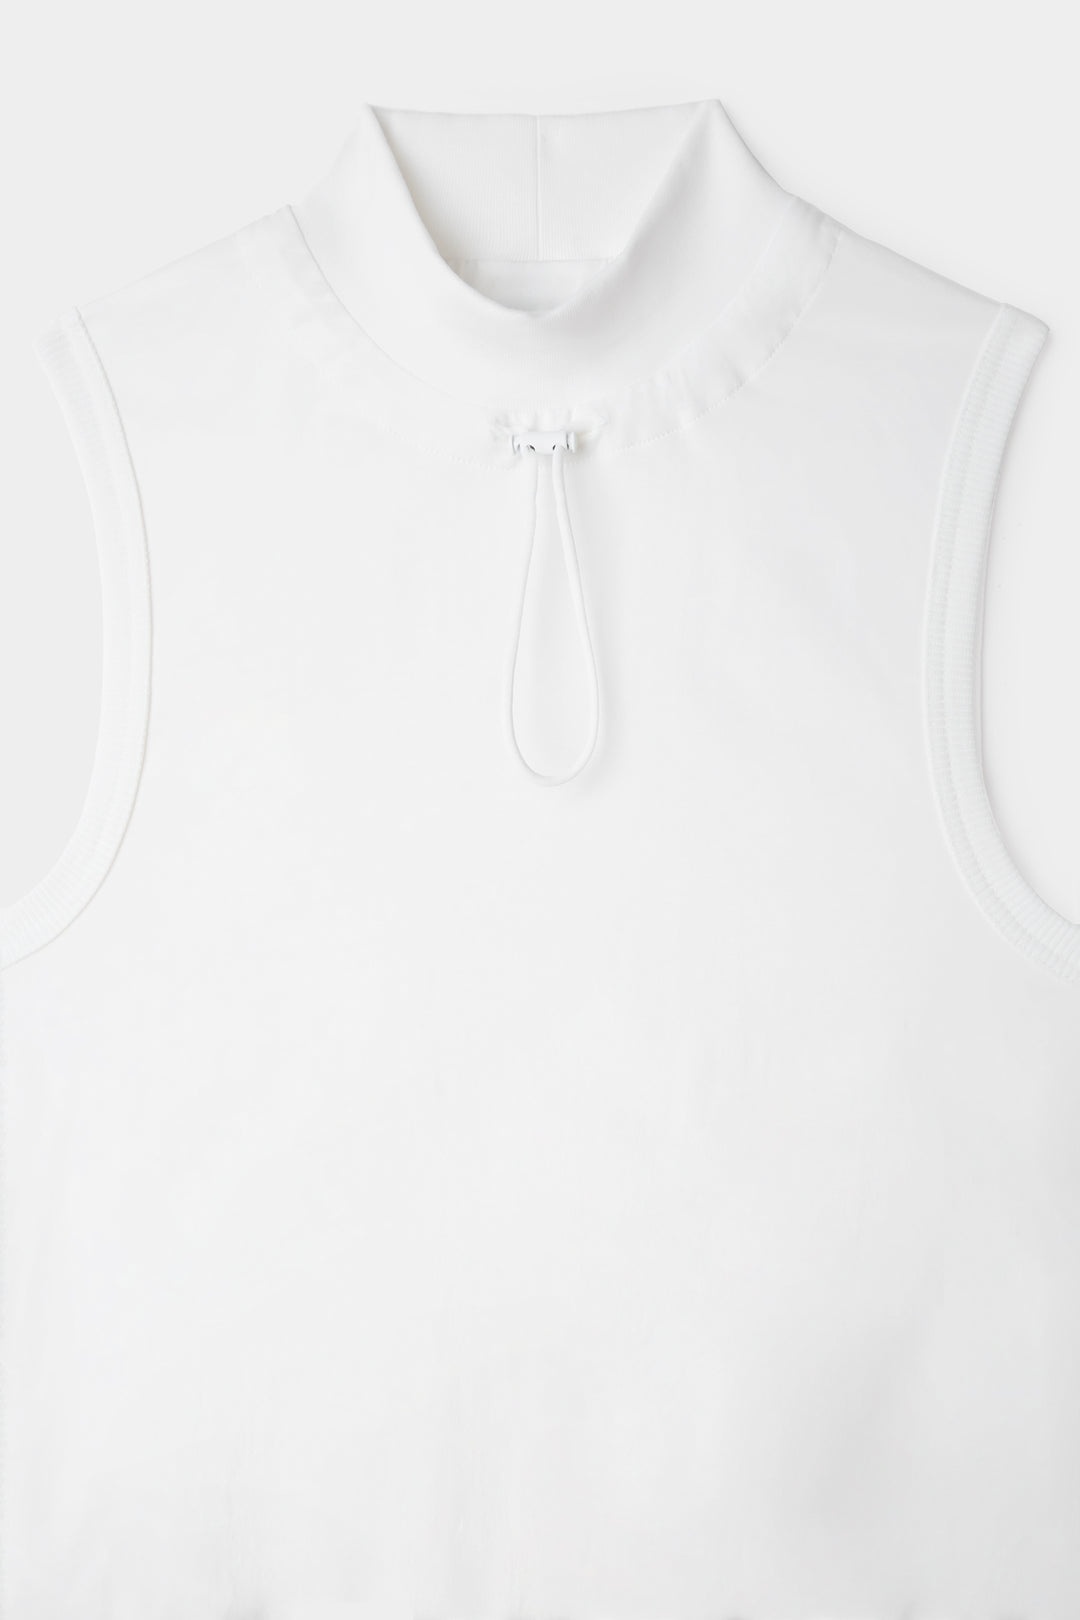 HIGHNECK COULISSE TOP / off white - 5